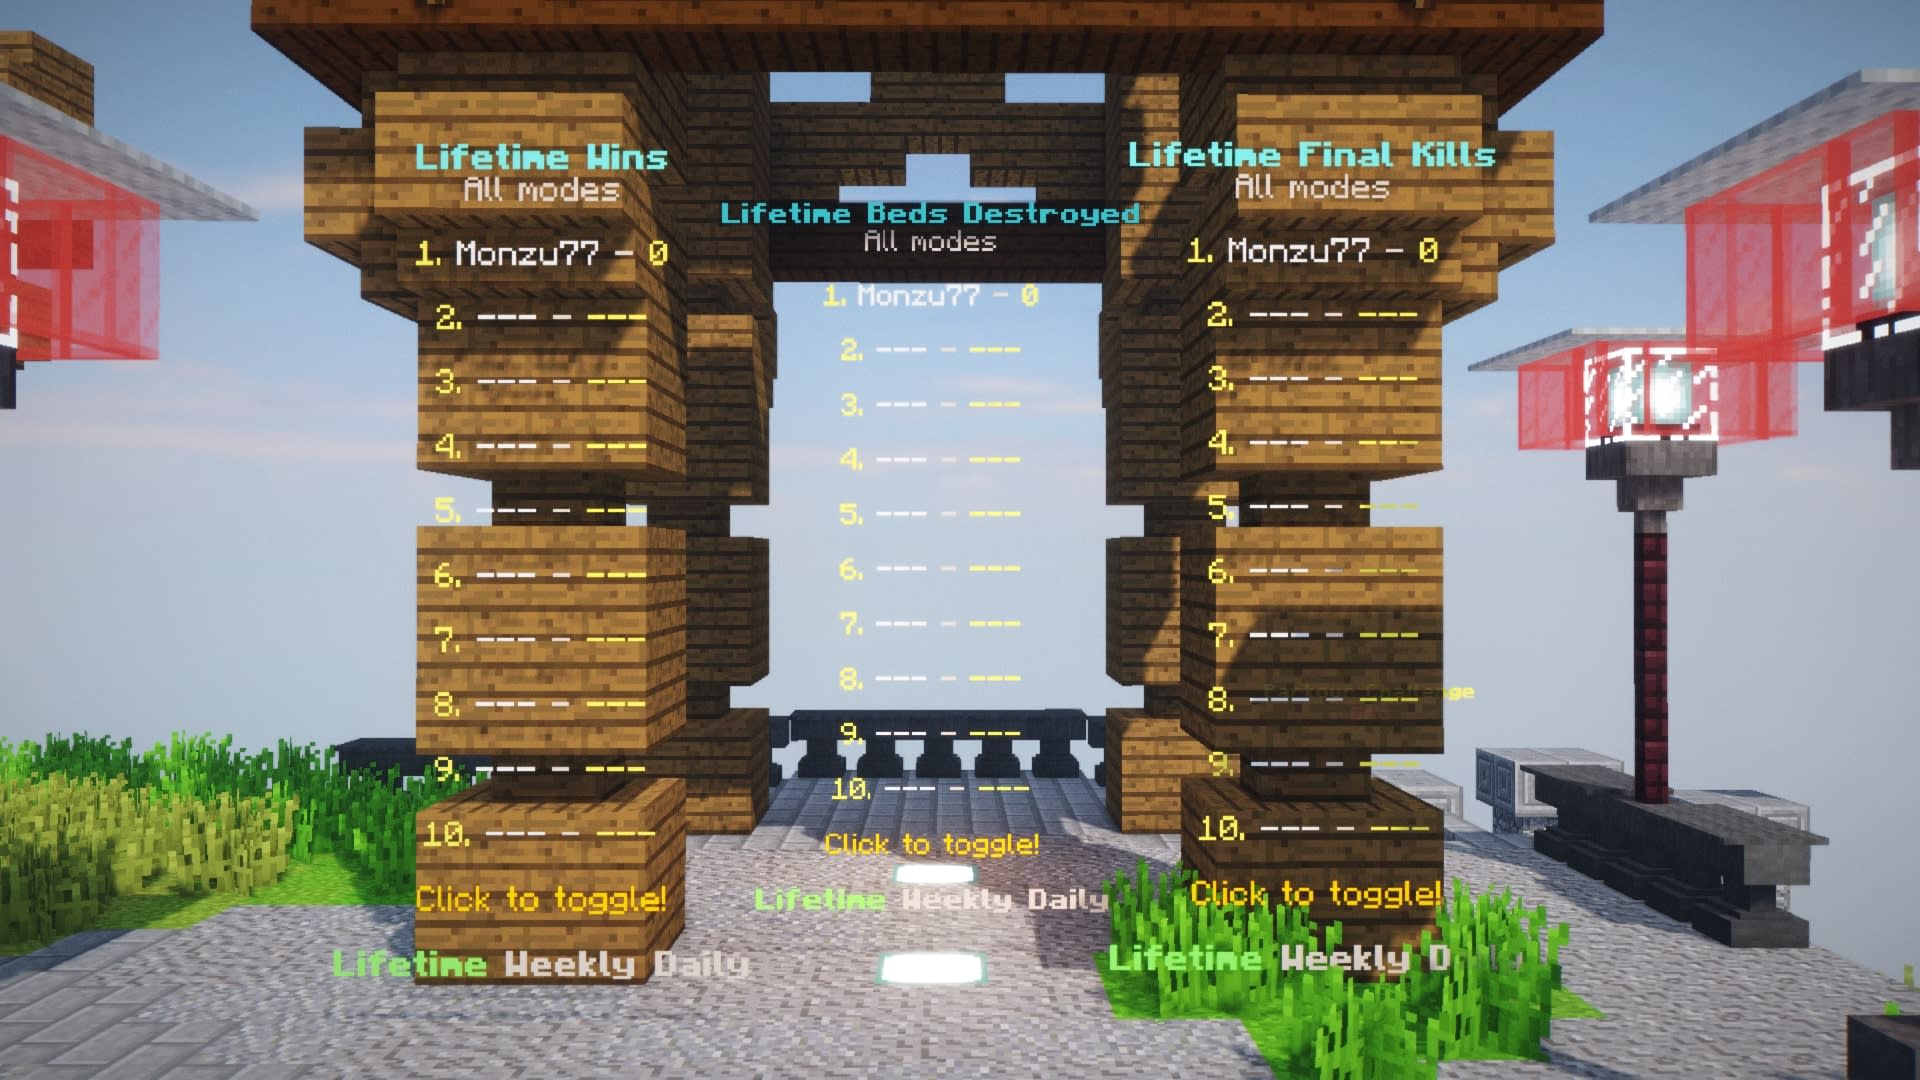 How to Set up a PERFECT Bedwars Server